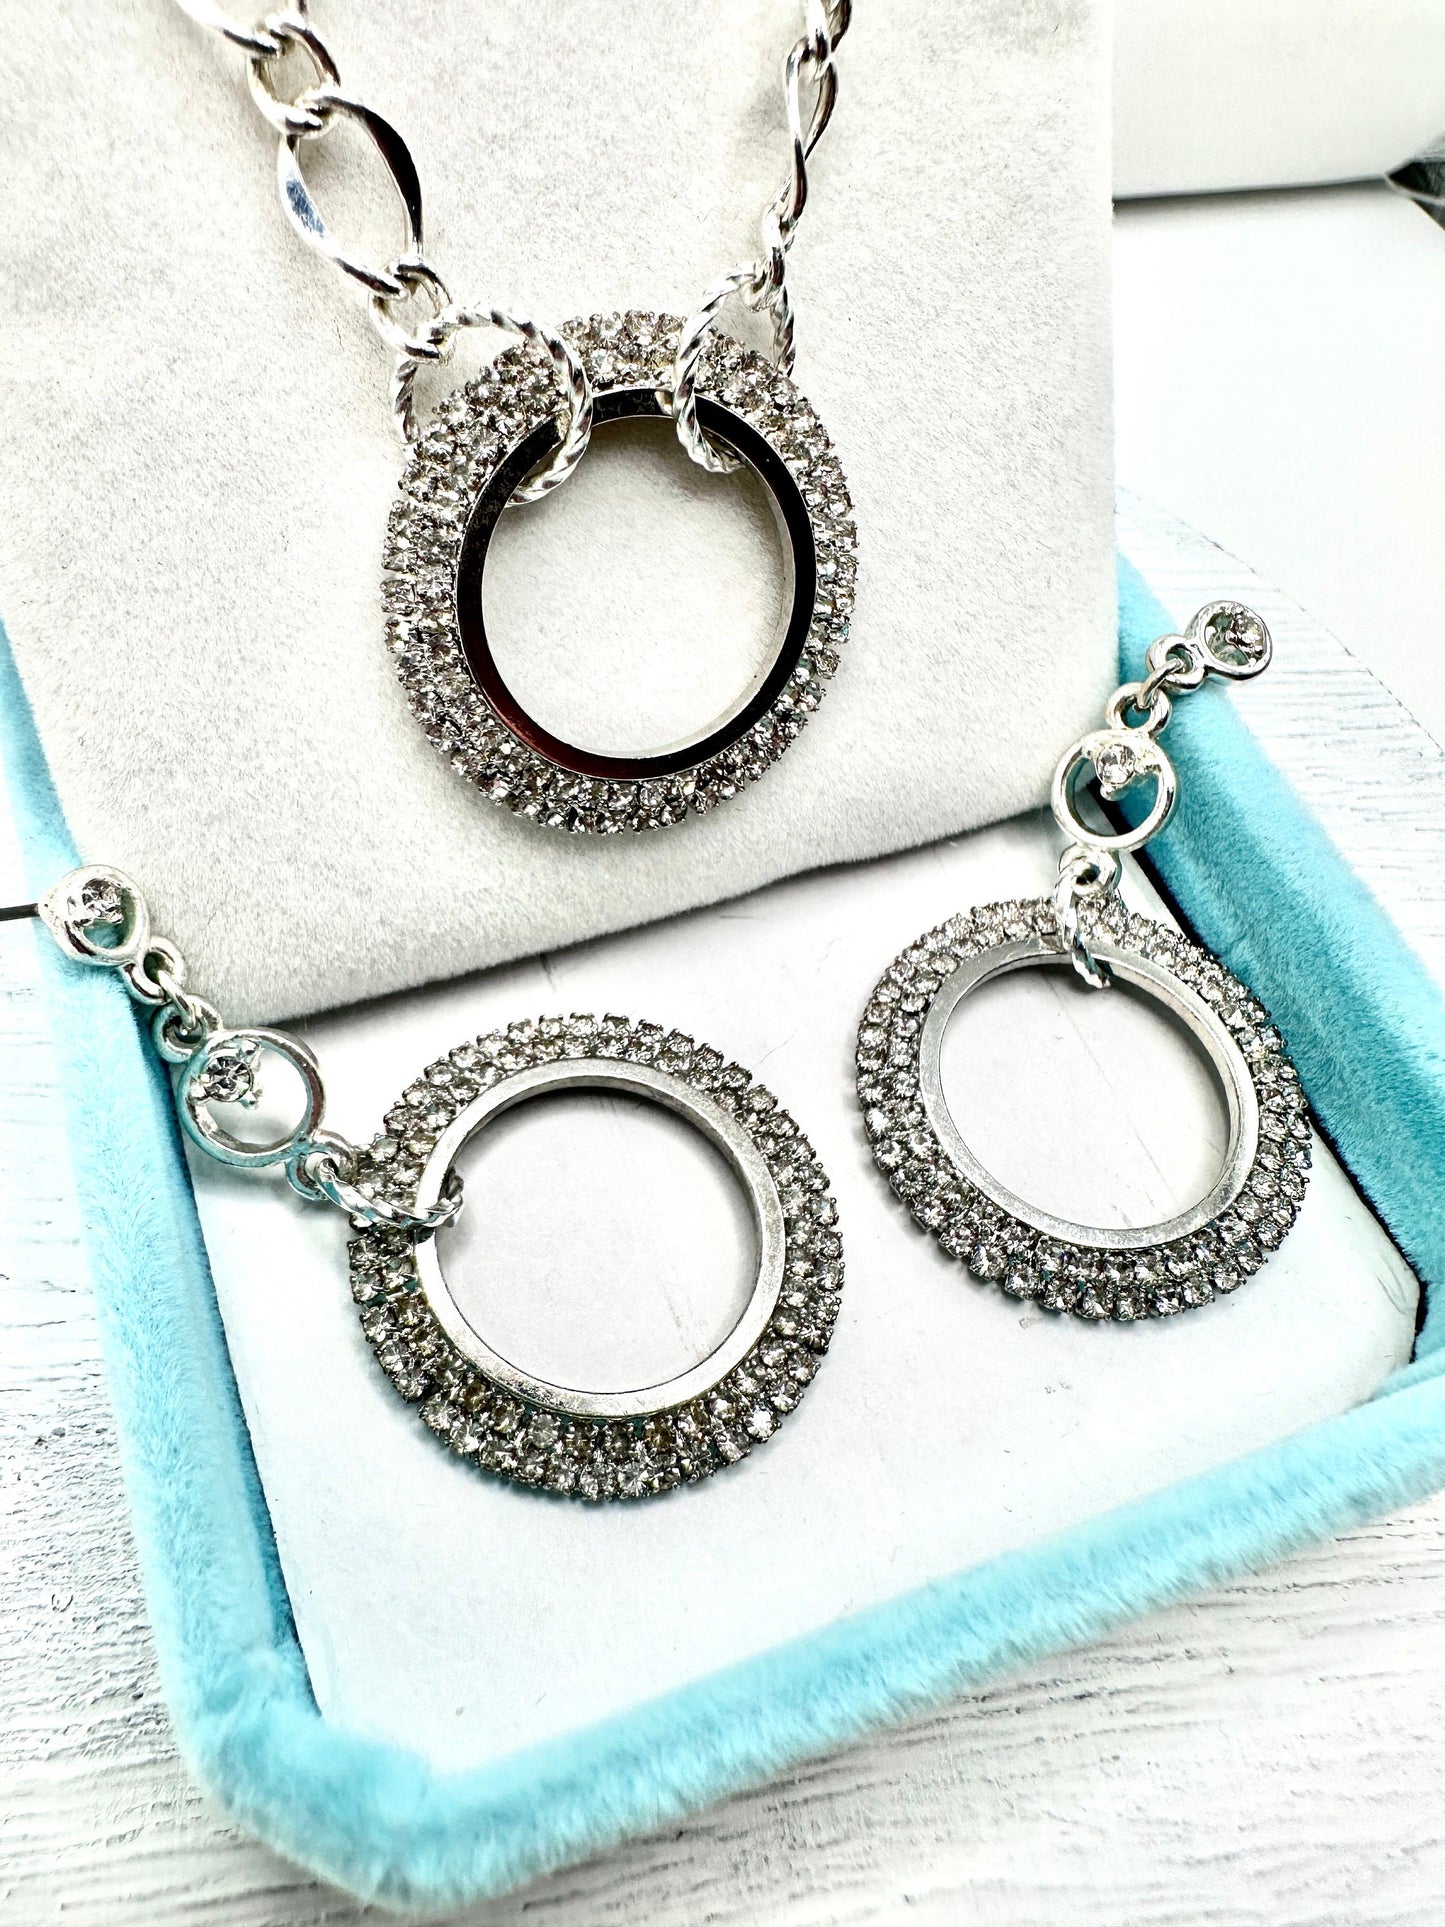 Silver Rhinestone  Necklace and Earring Set